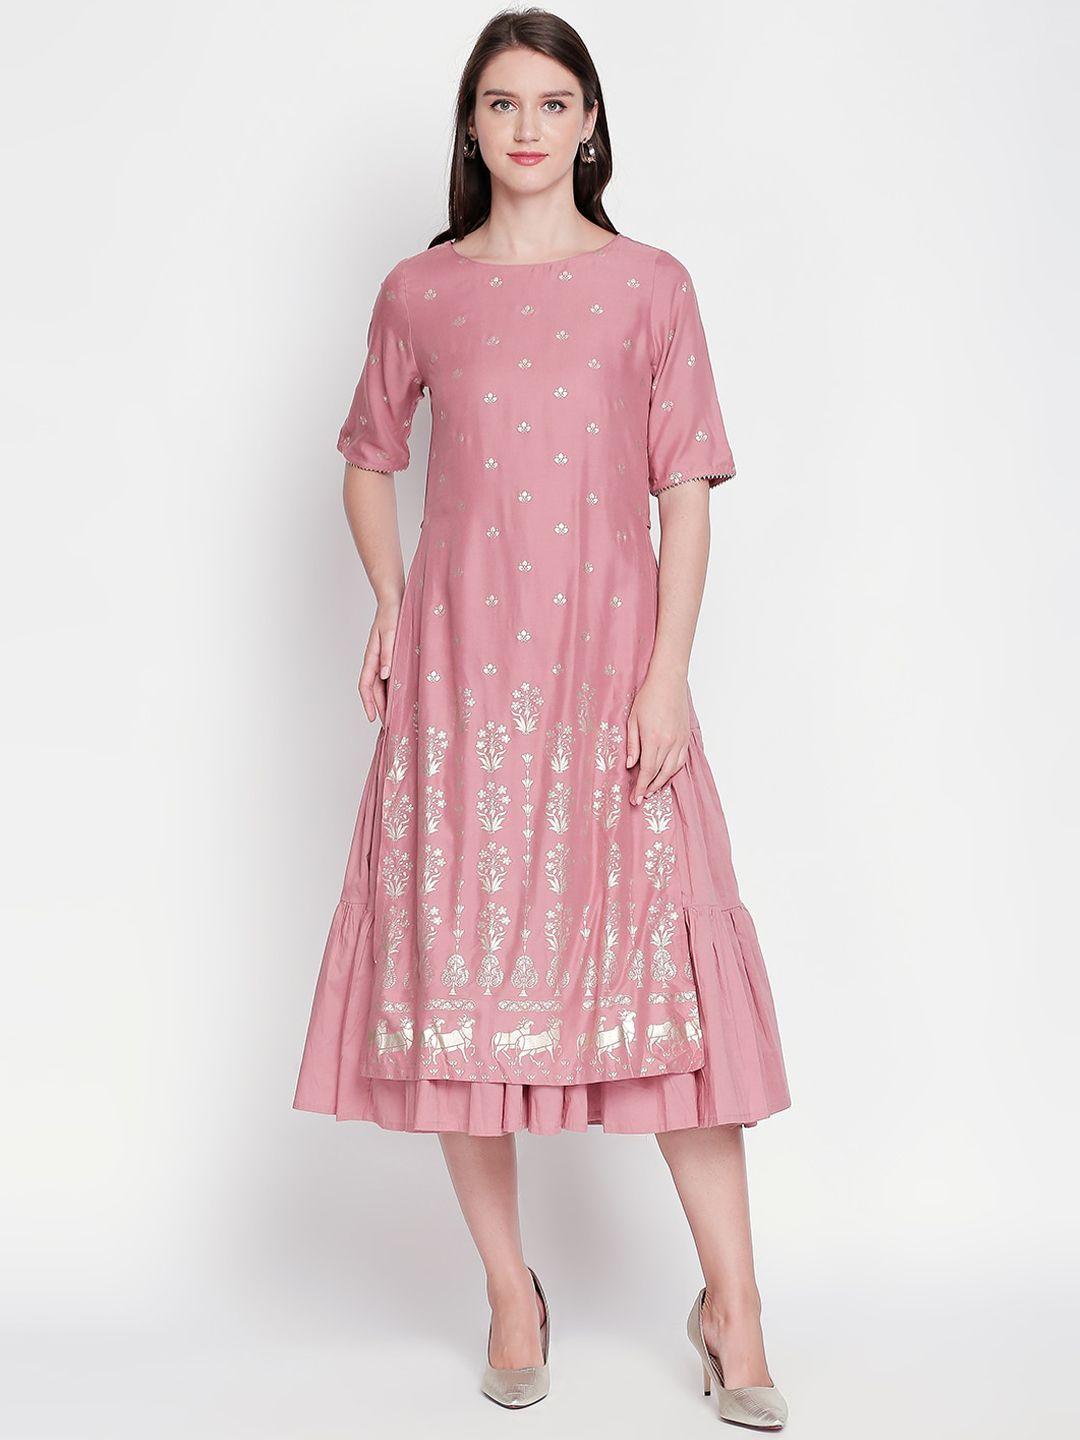 rangmanch-by-pantaloons-women-pink-printed-fit-and-flare-dress